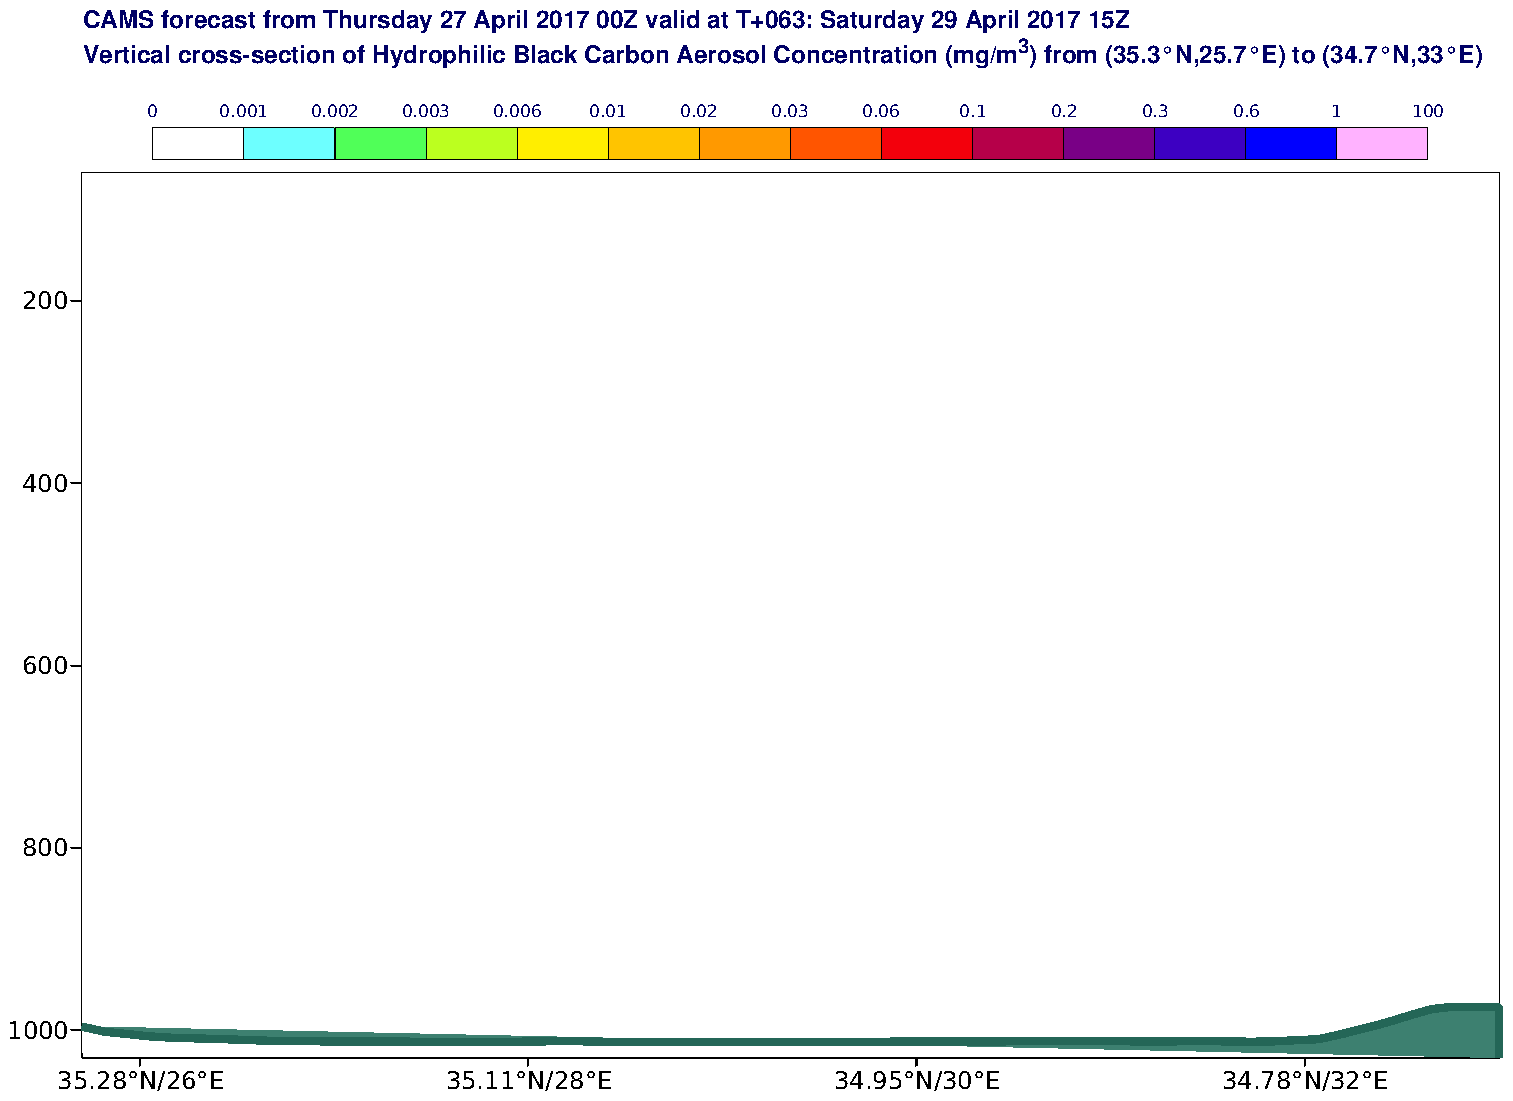 Vertical cross-section of Hydrophilic Black Carbon Aerosol Concentration (mg/m3) valid at T63 - 2017-04-29 15:00